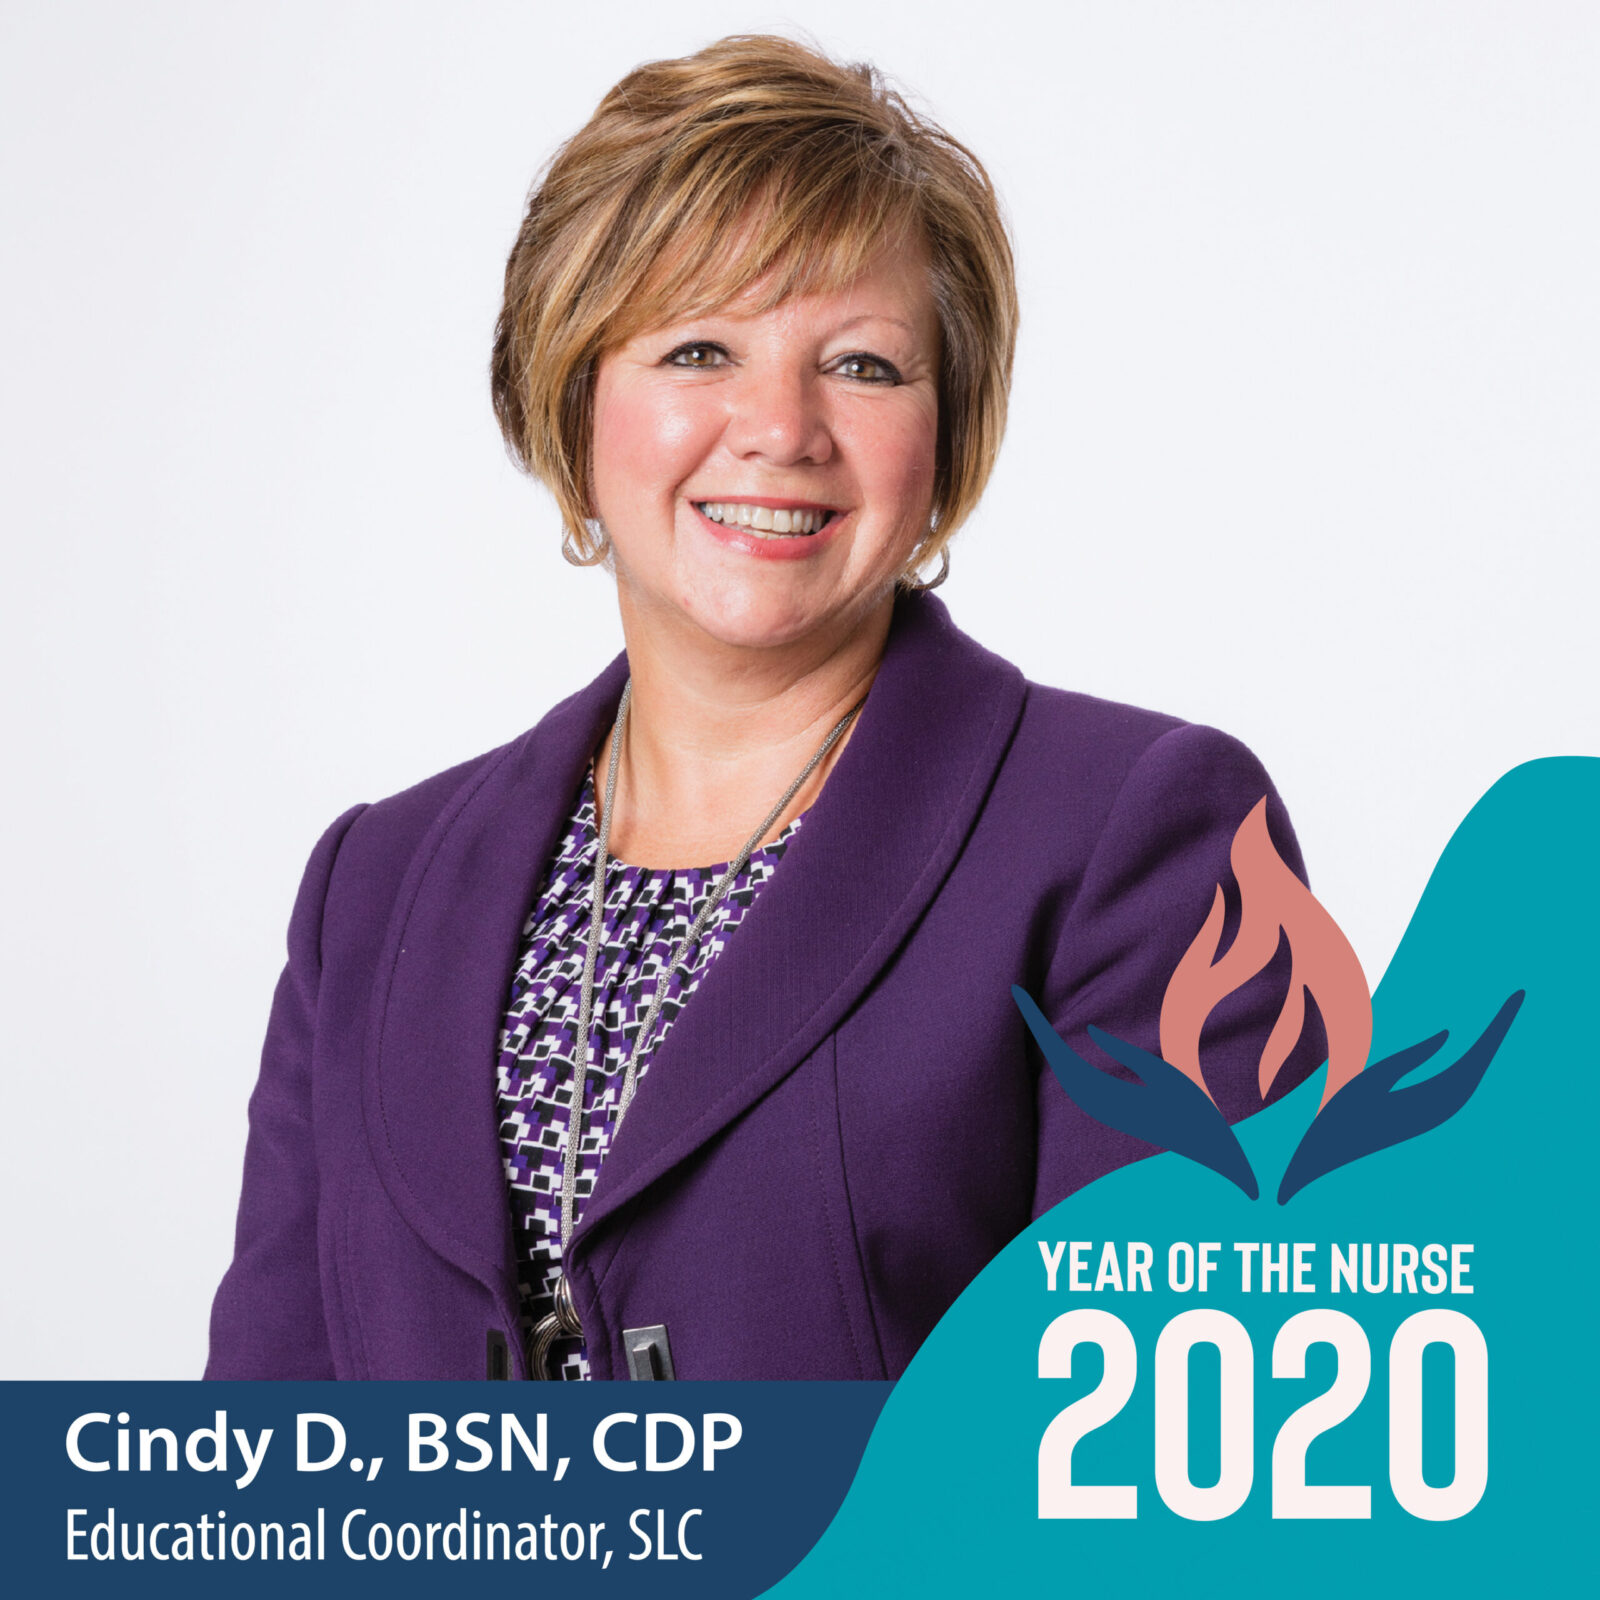 Year of the Nurse Nominee: Cindy DeGroot, BSN, CDP